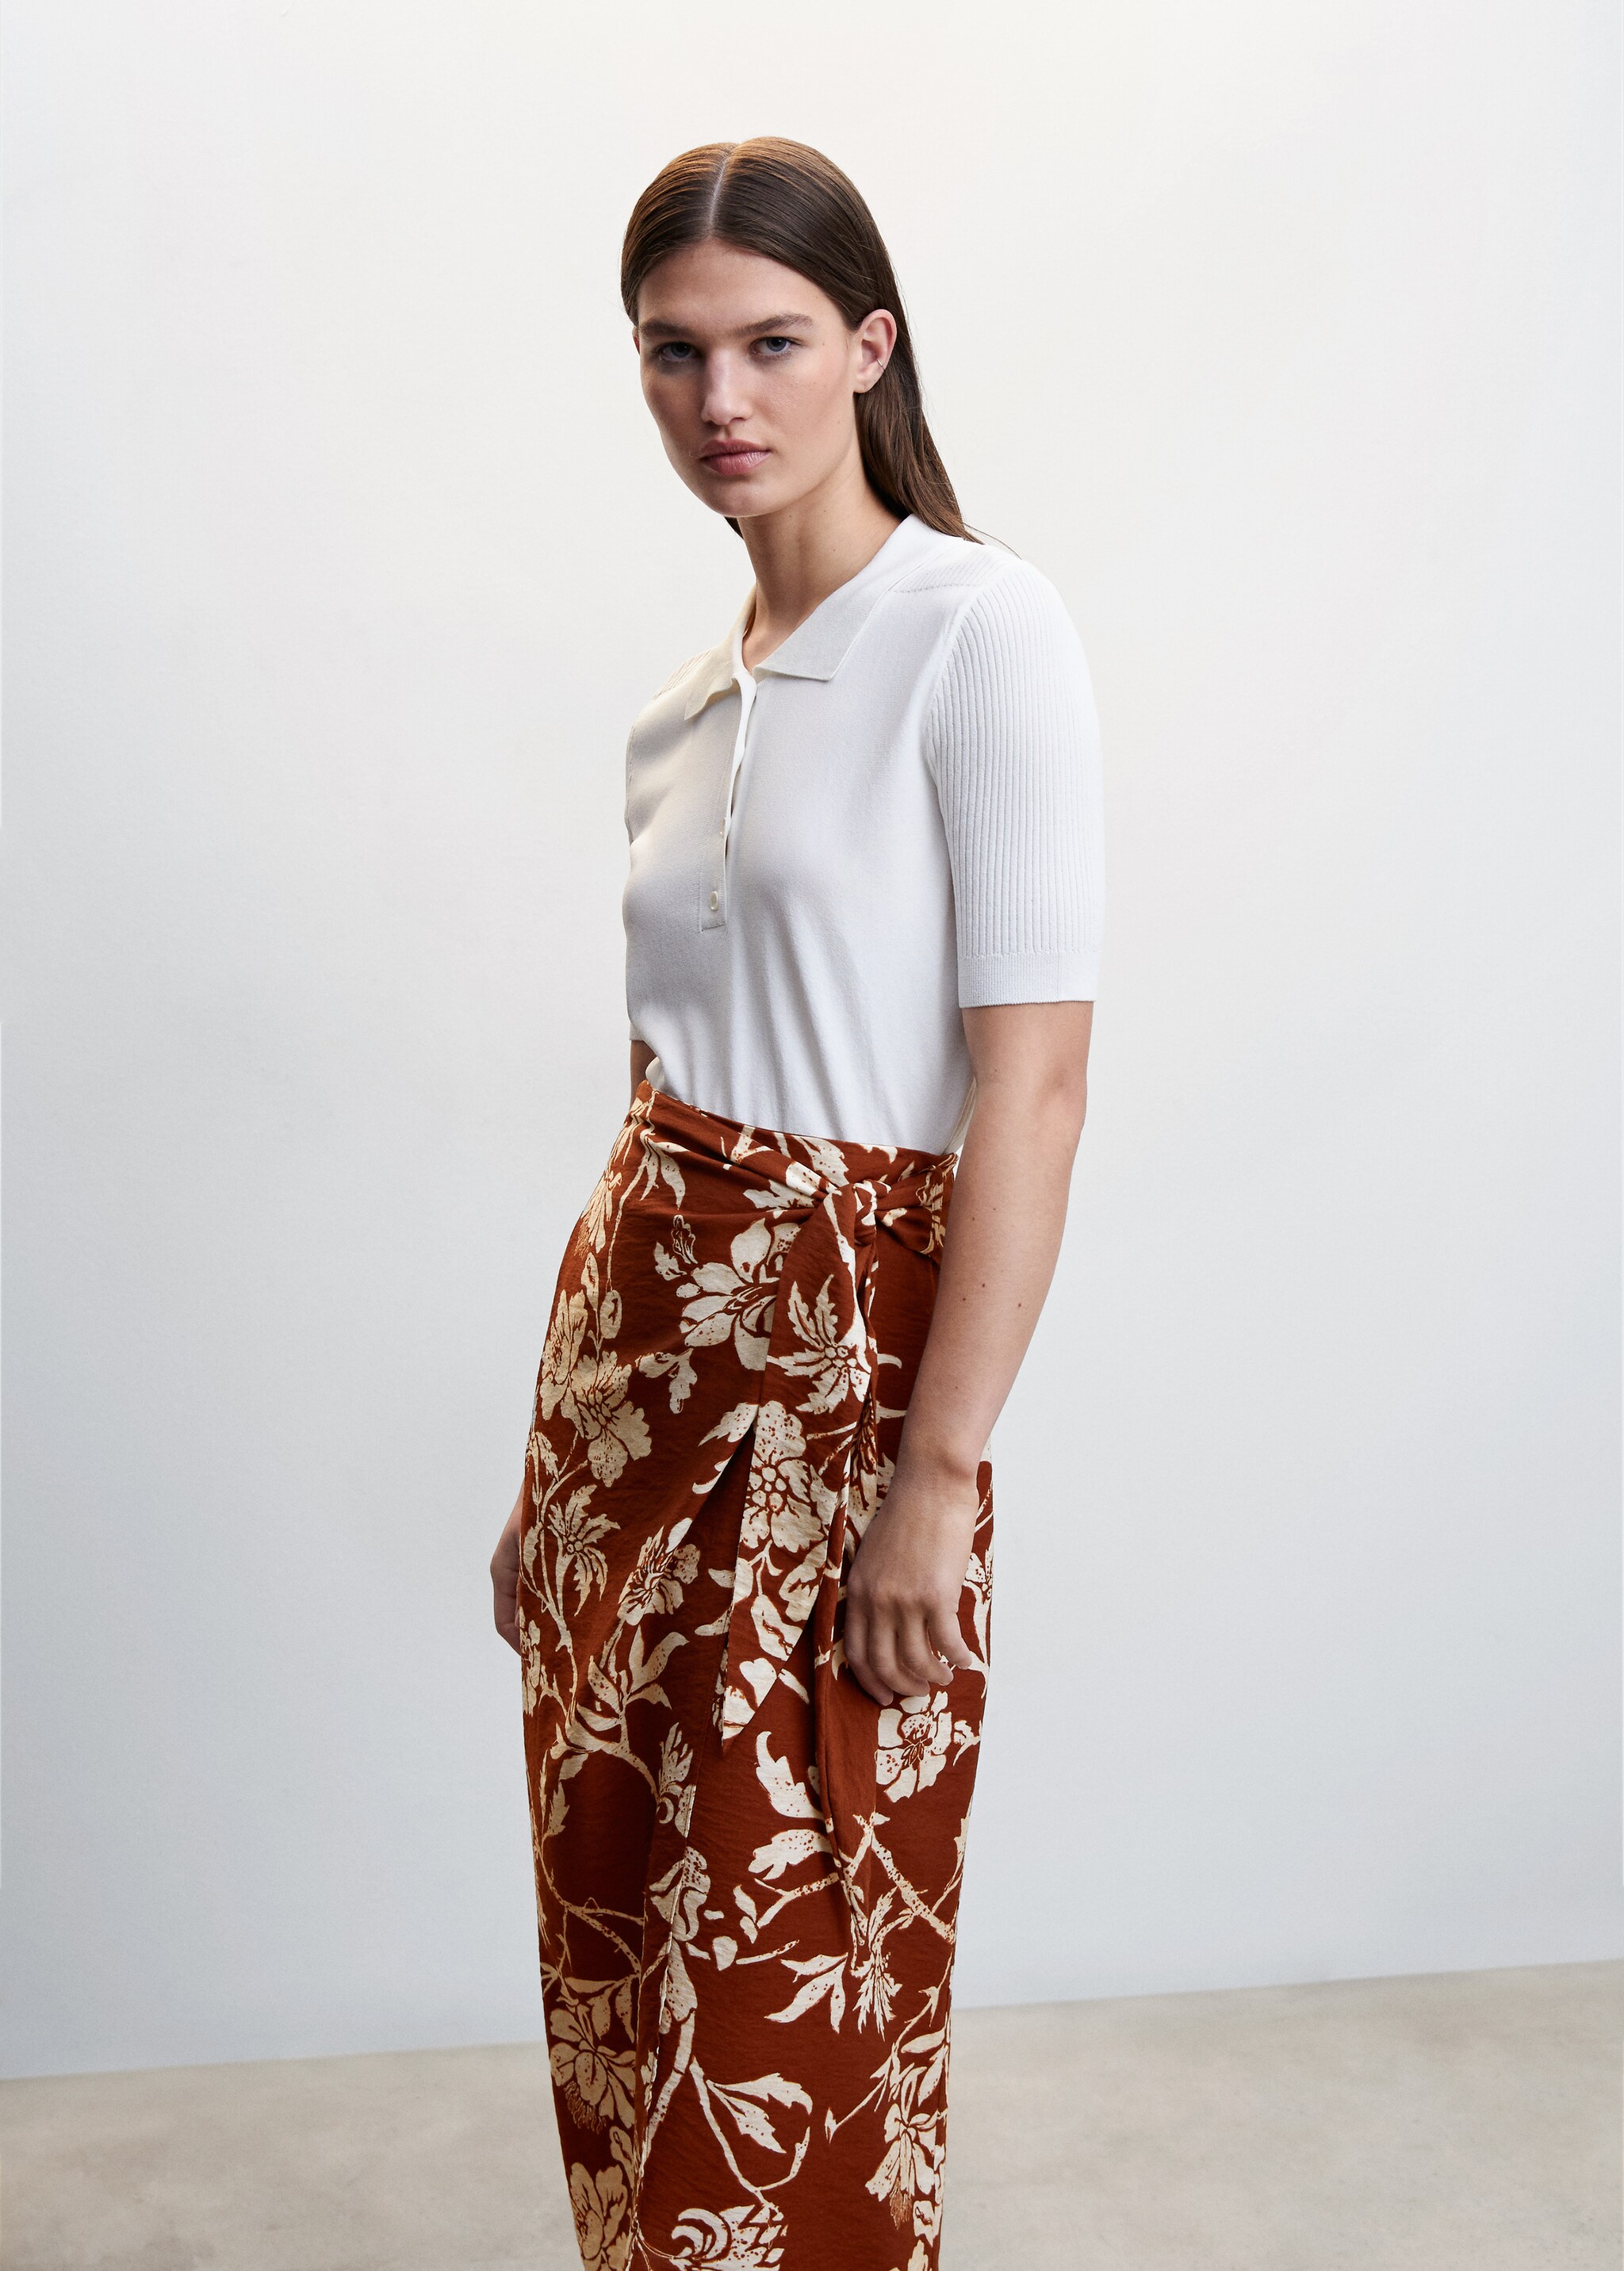 Floral wrapped skirt - Details of the article 1